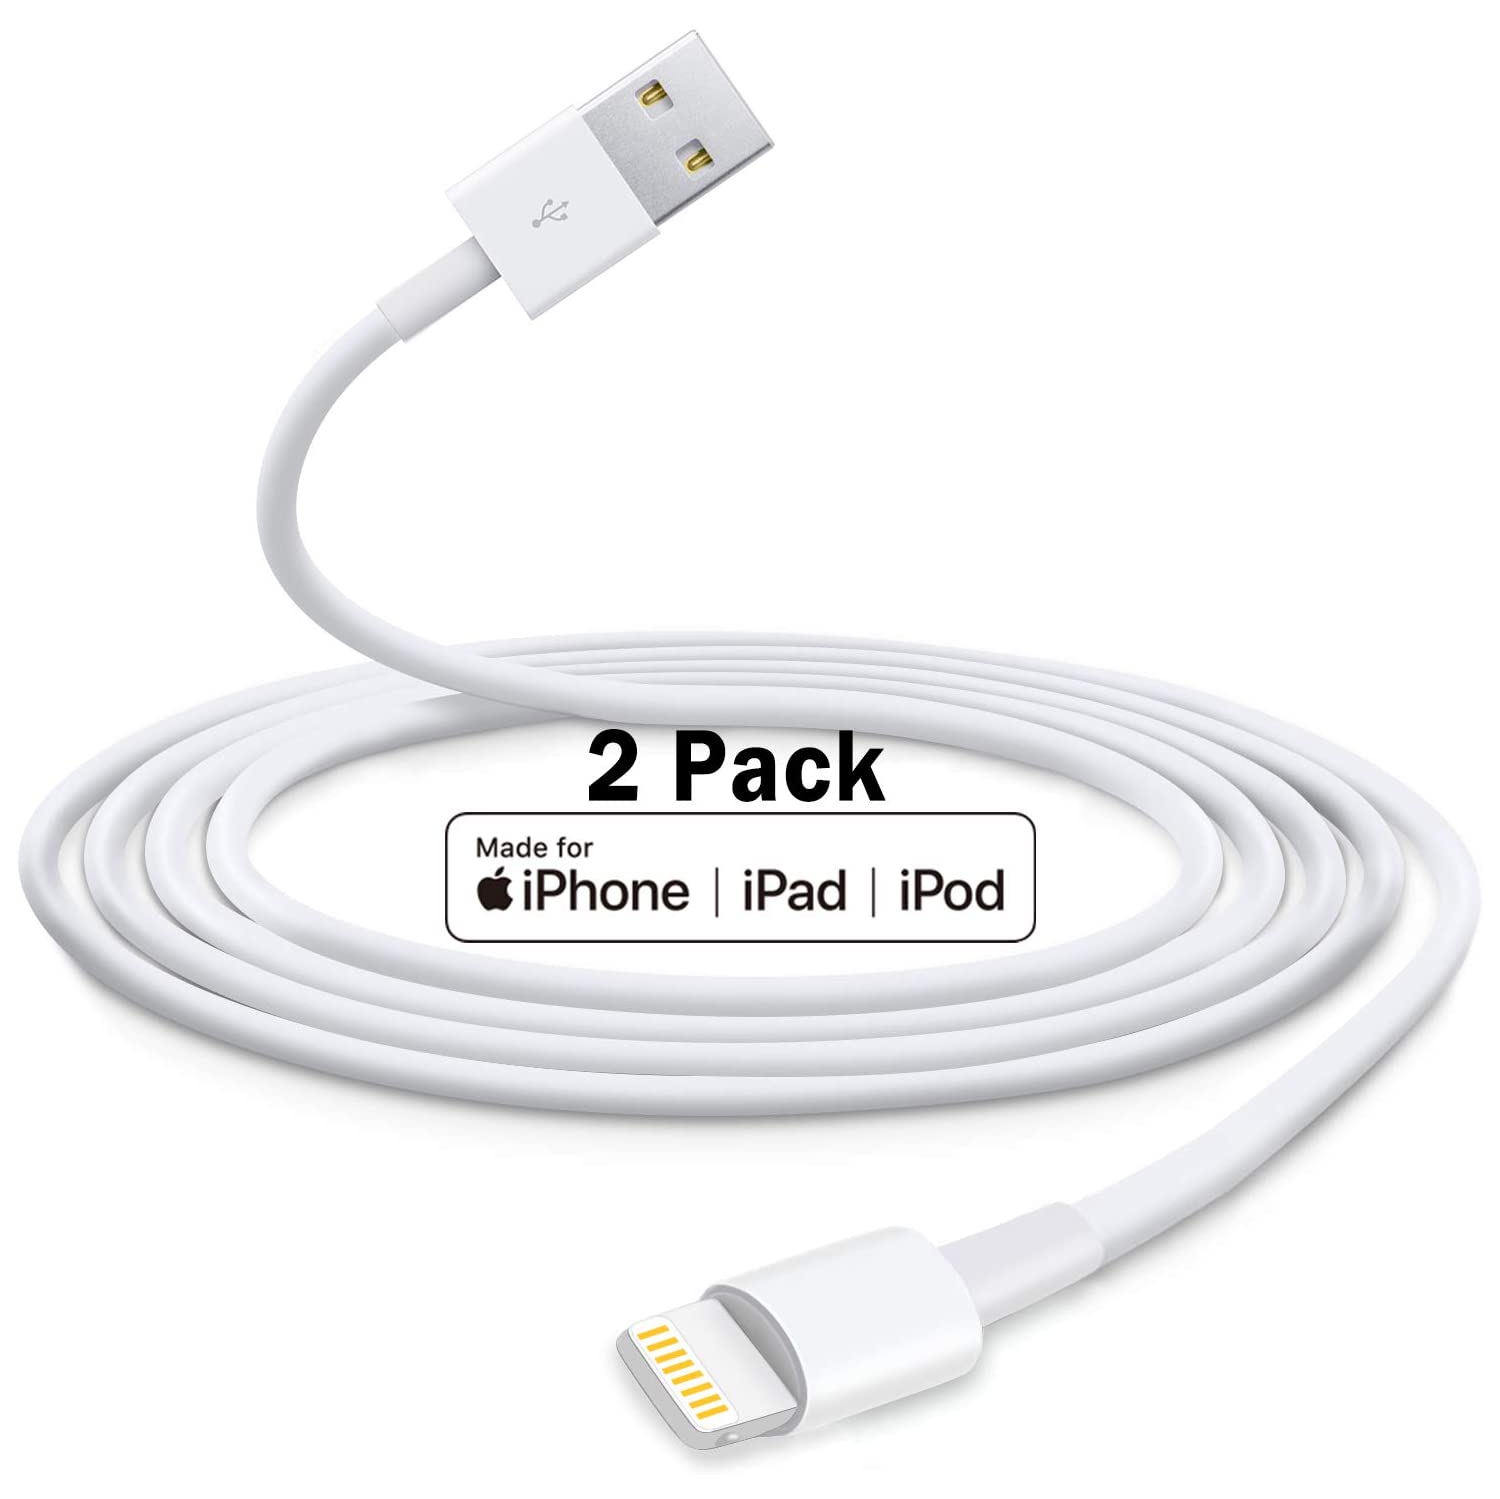 (C/S)[2 Packs] (6.6Ft / 2m) iPhone iPad Charging Charger Cord Lightning to USB Cable COMPATIBLE with Apple iPad iPhone 11/X/8/7/6/Plus/5s/5c/SE (FREE SHIPPING)(Non-Retail Pack)